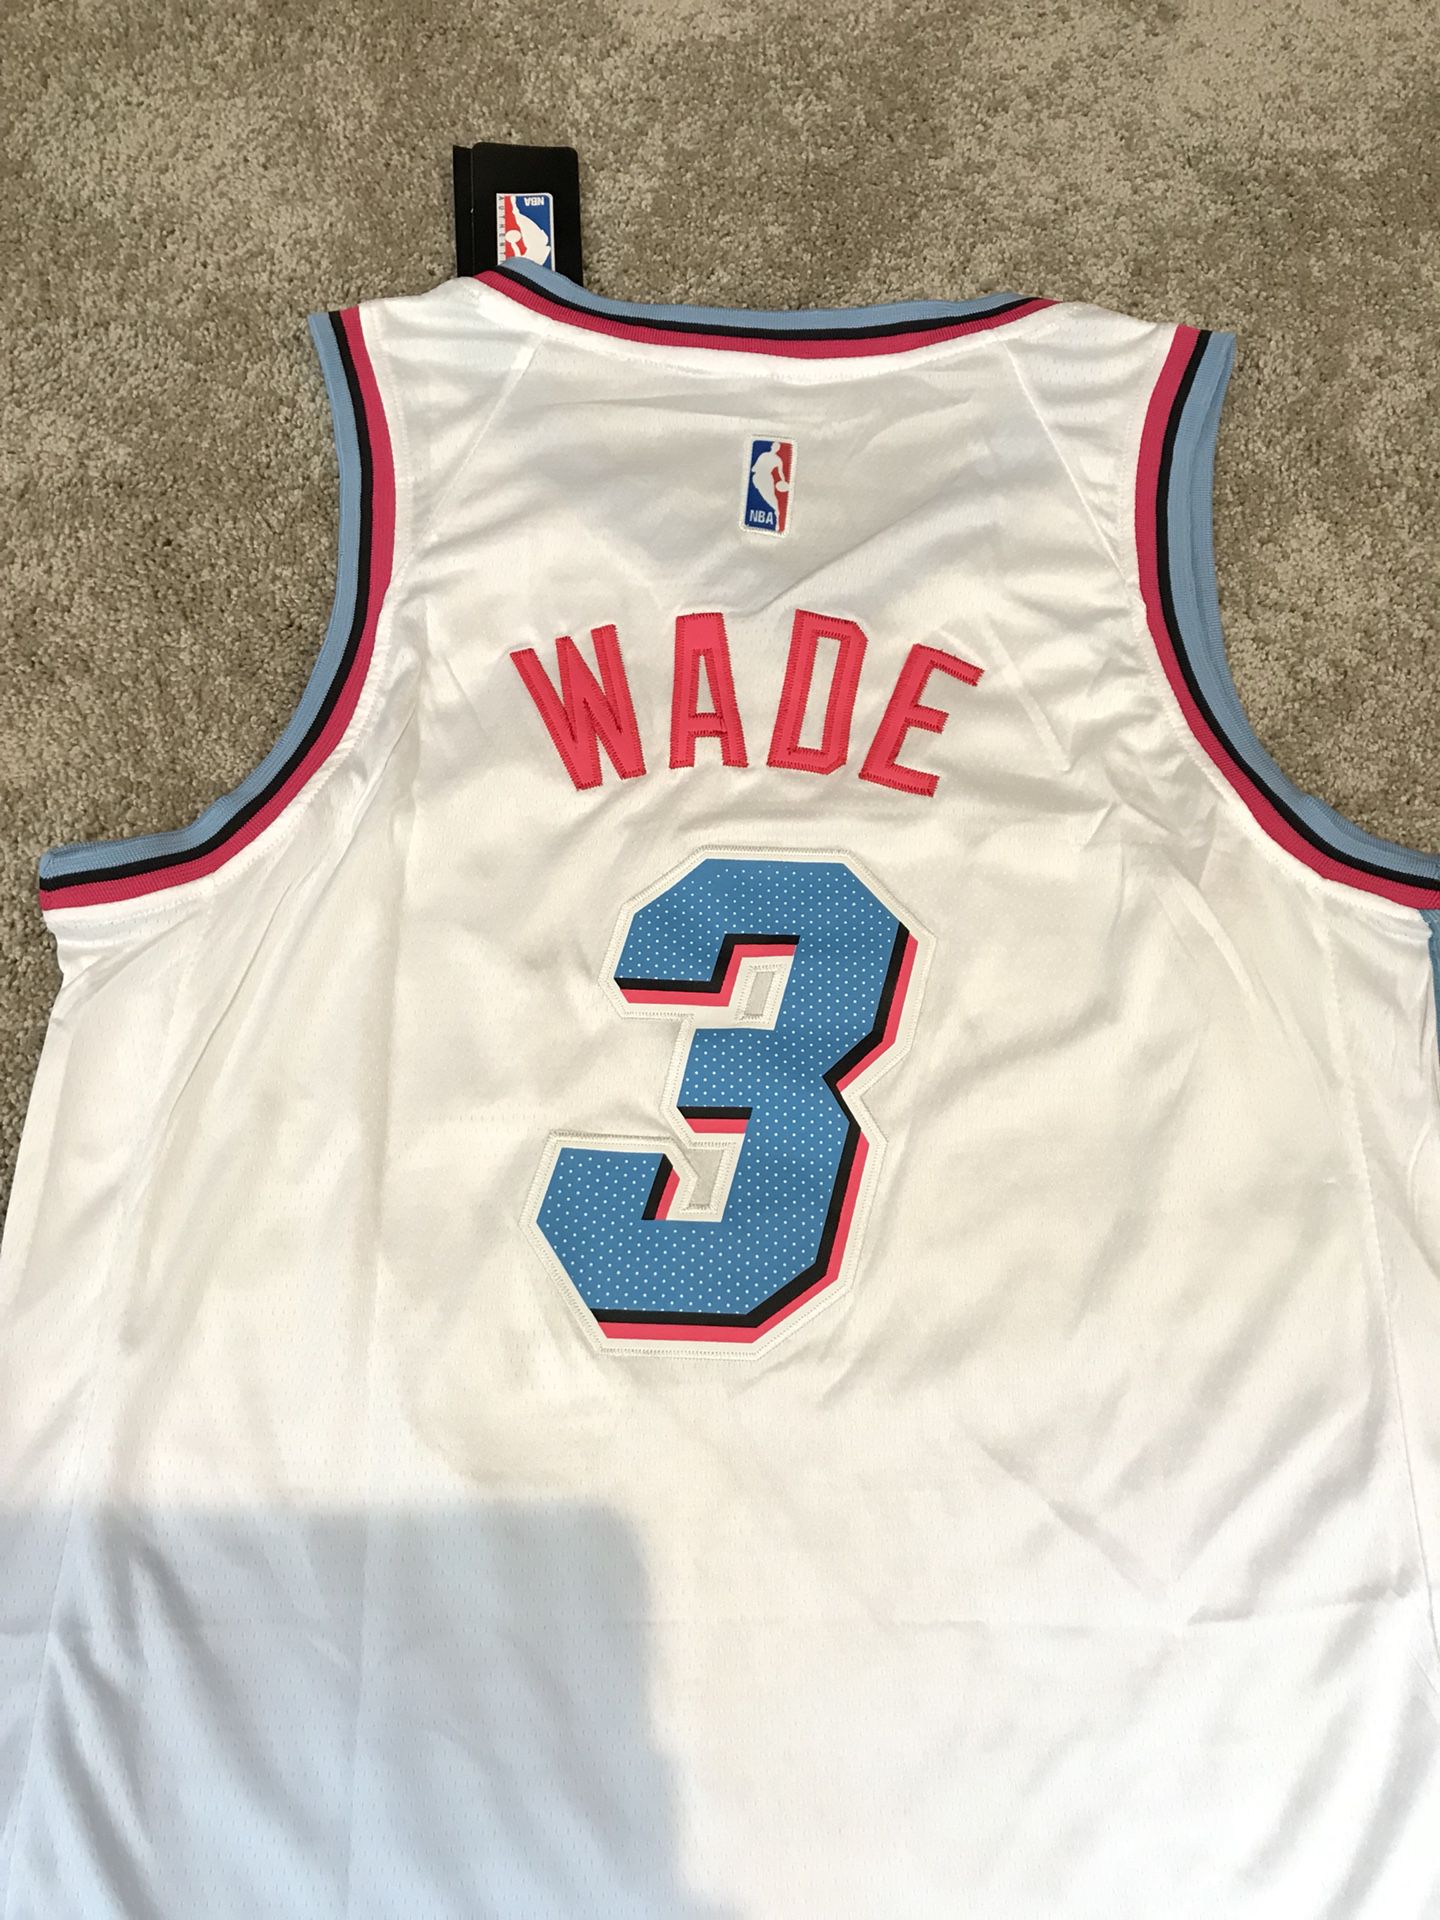 Dwyane Wade Miami Heat City Edition Jersey  New Men's XL for Sale in  Sacramento, CA - OfferUp